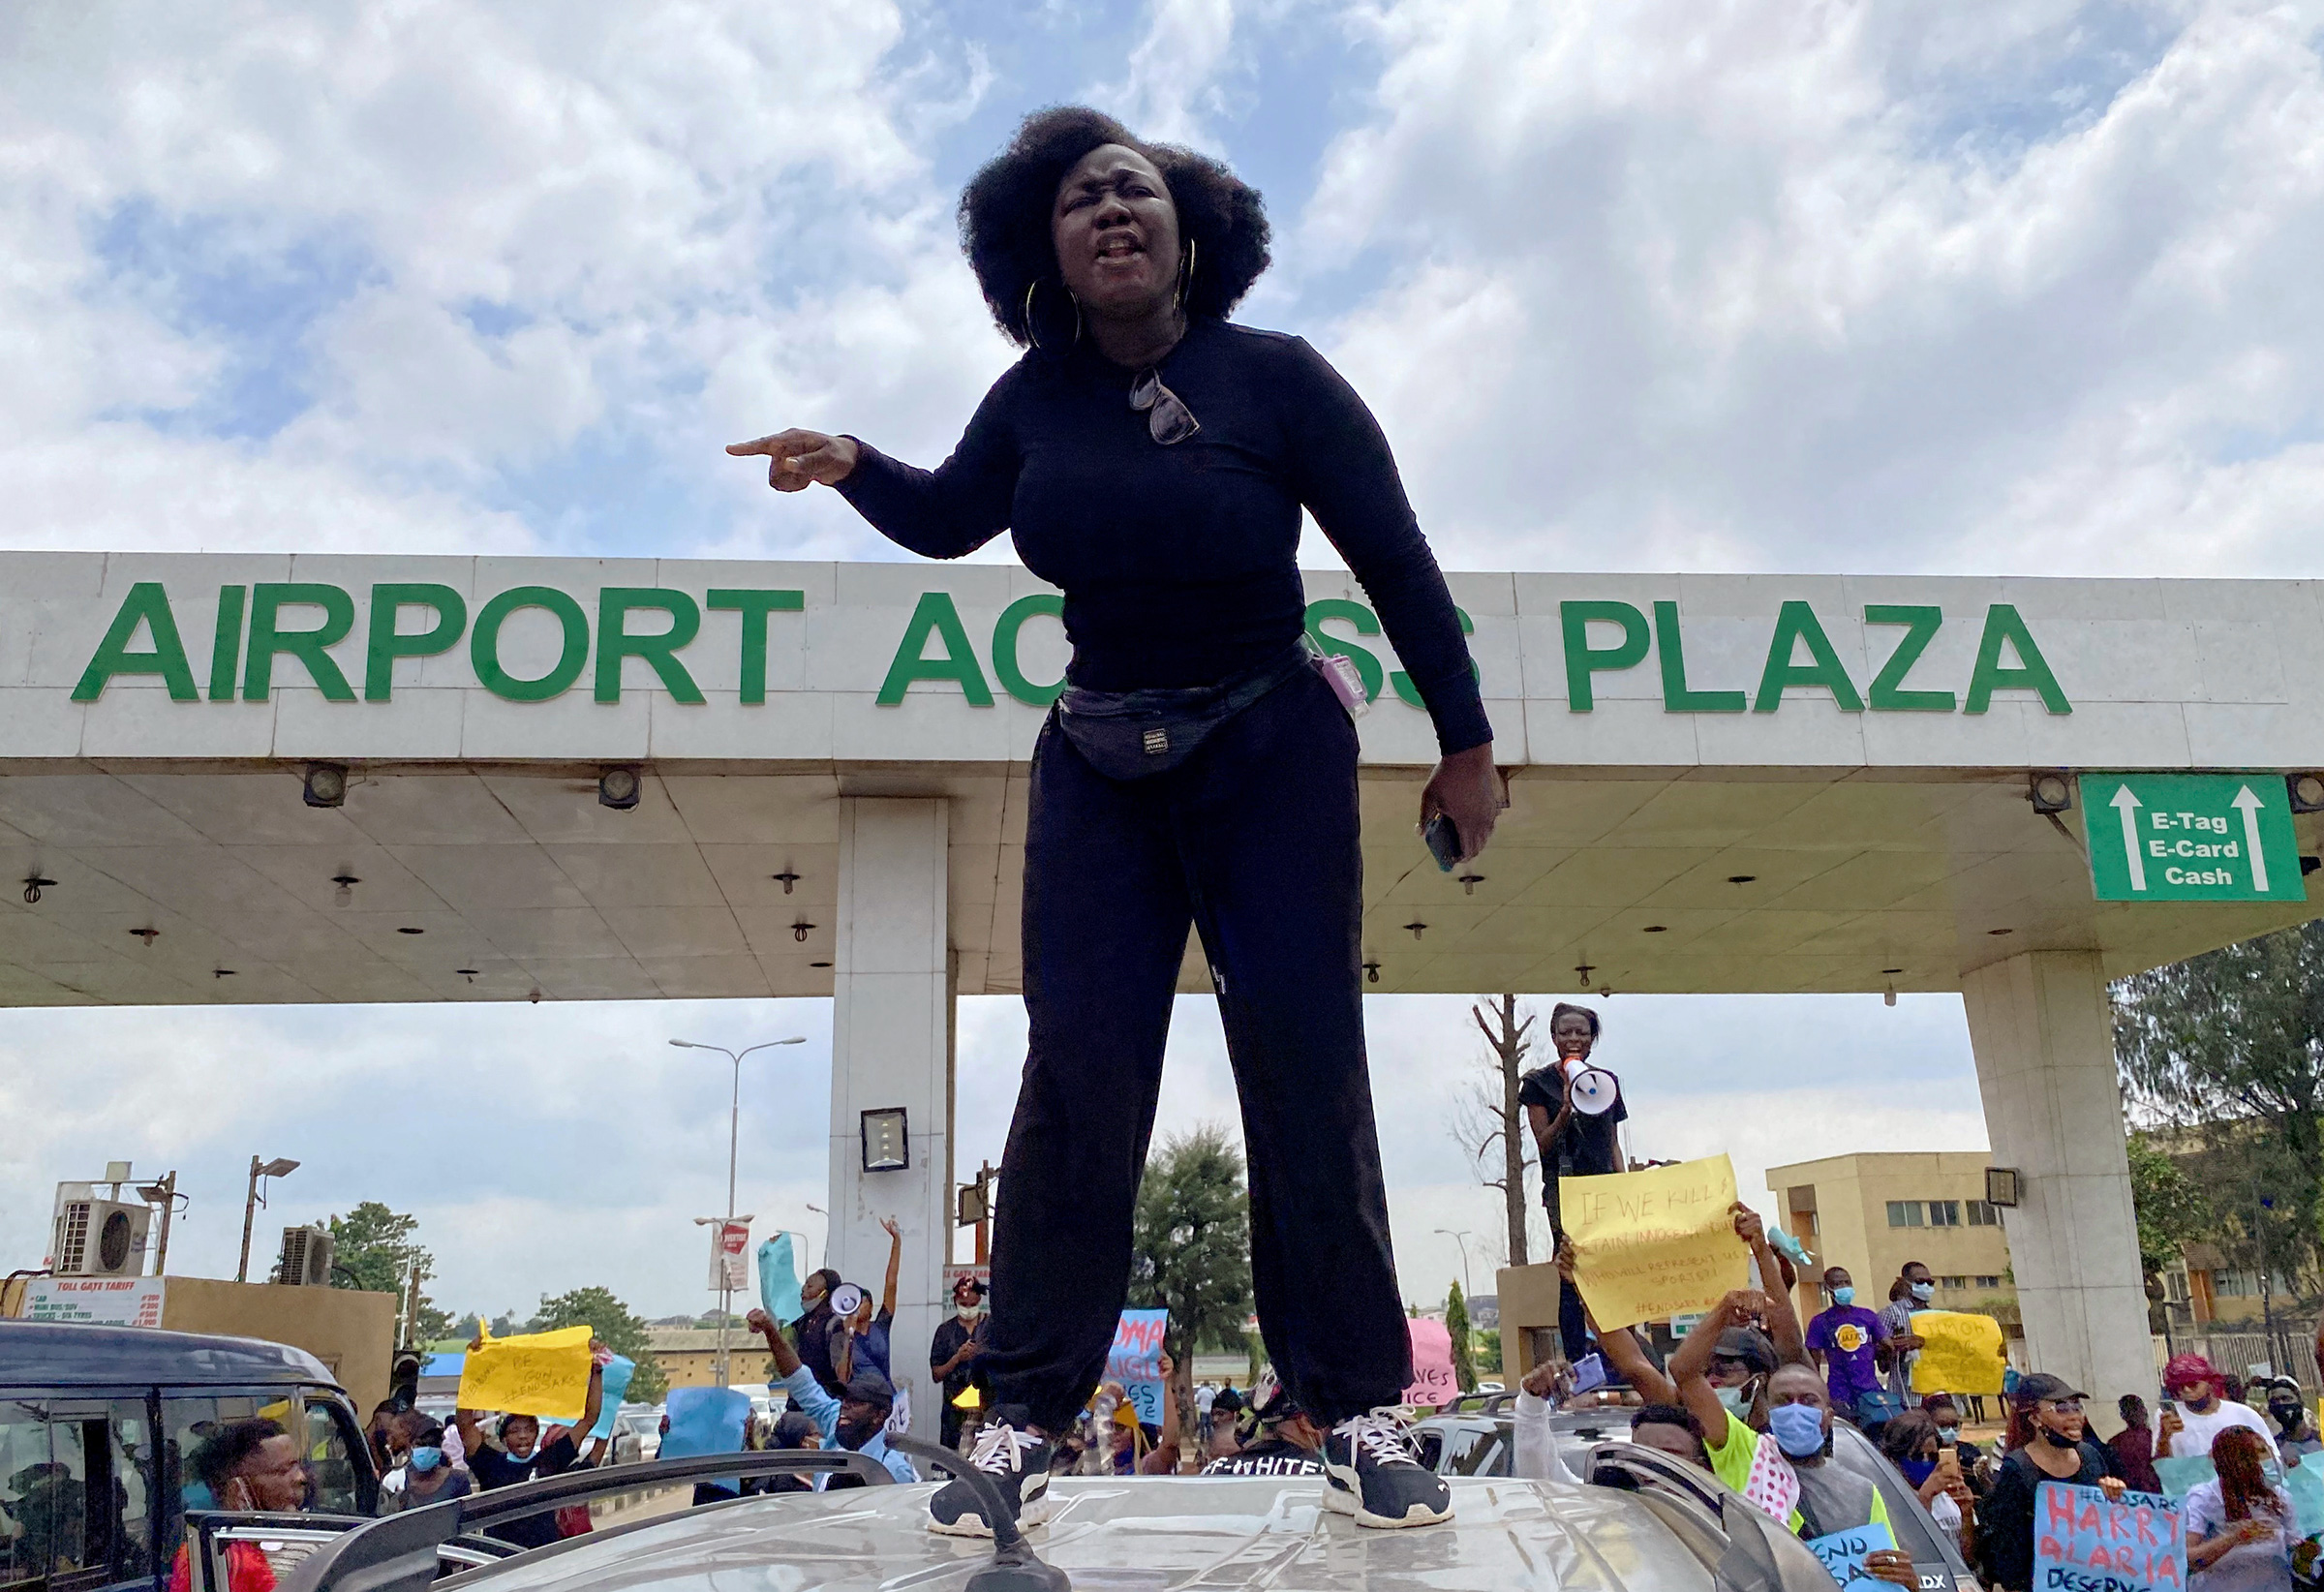 A demonstrator stands atop a vehicle and shouts slogans as others carry banners while blocking a road leading to the airport in Lagos on Oct. 12, 2020. (Seun Sanni—Reuters)